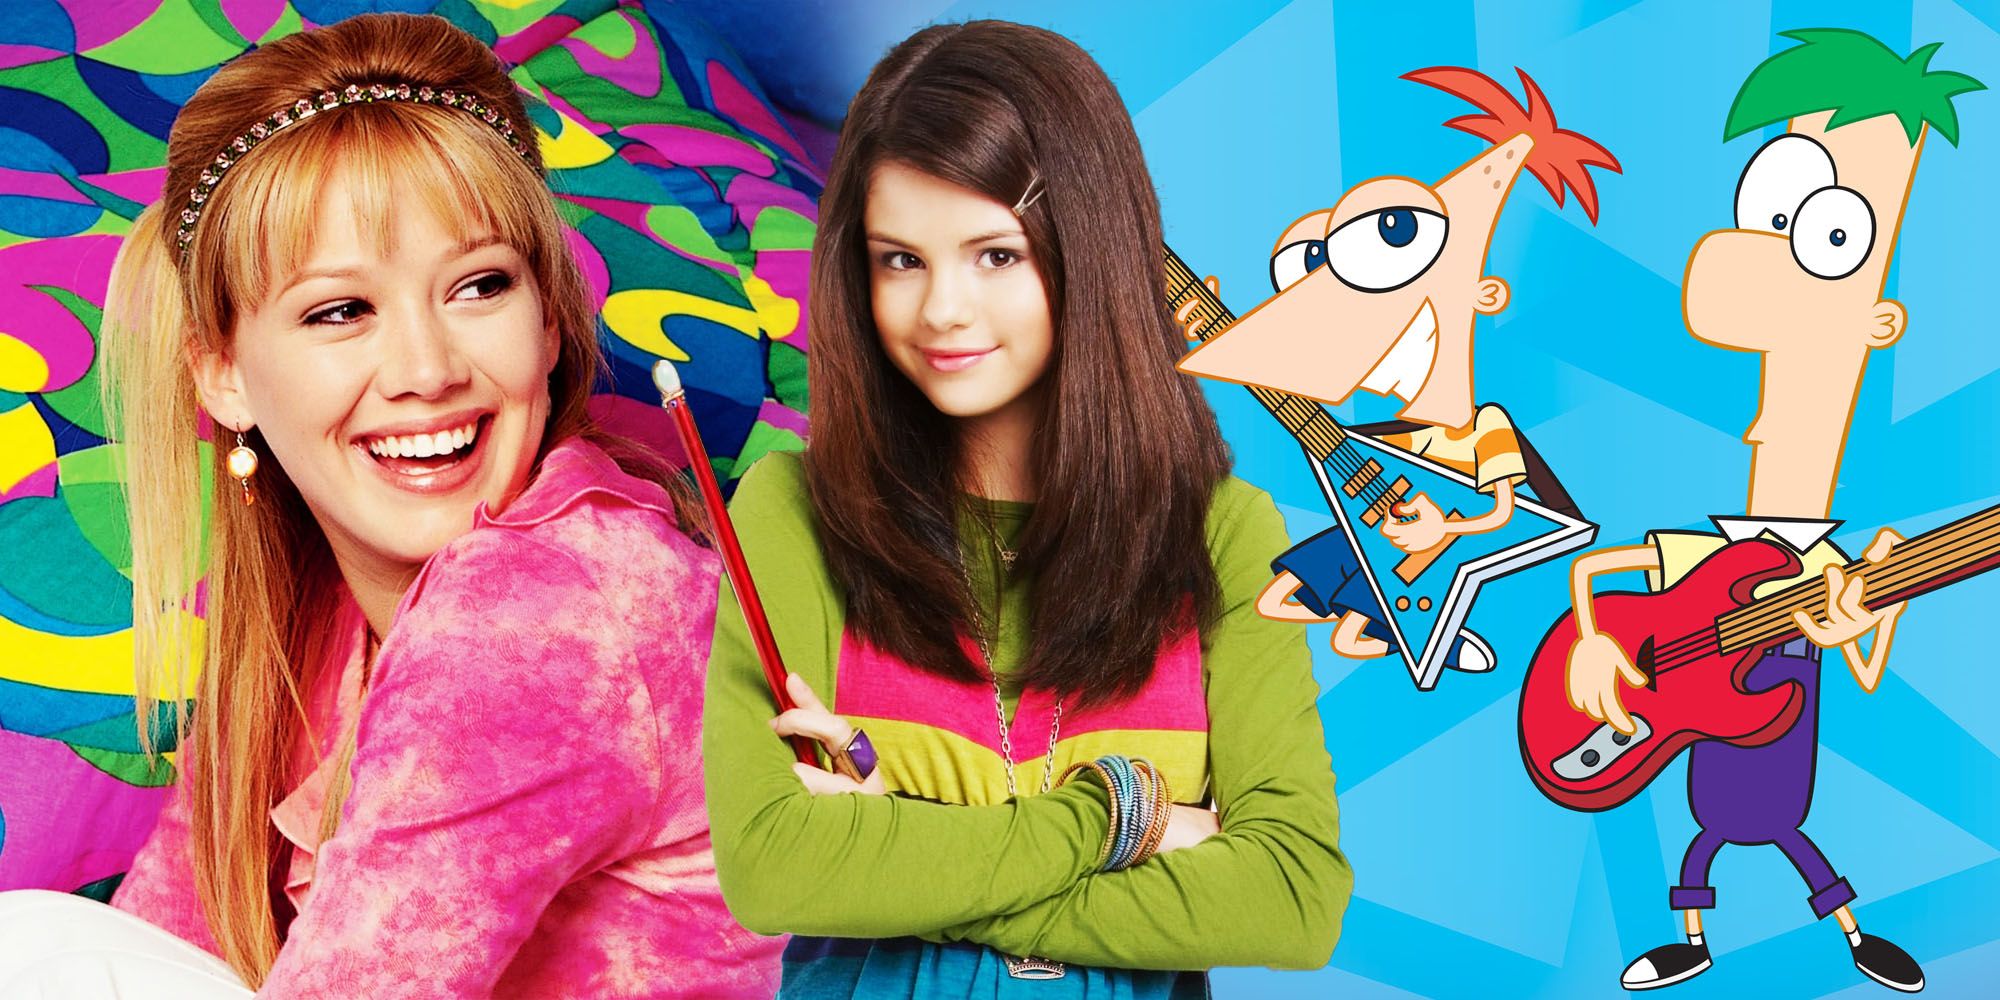 Disney Channel tv show collage with Lizzie McGuire, Selena Gomez from Wizards of Waverly Place and Phineas and Ferb